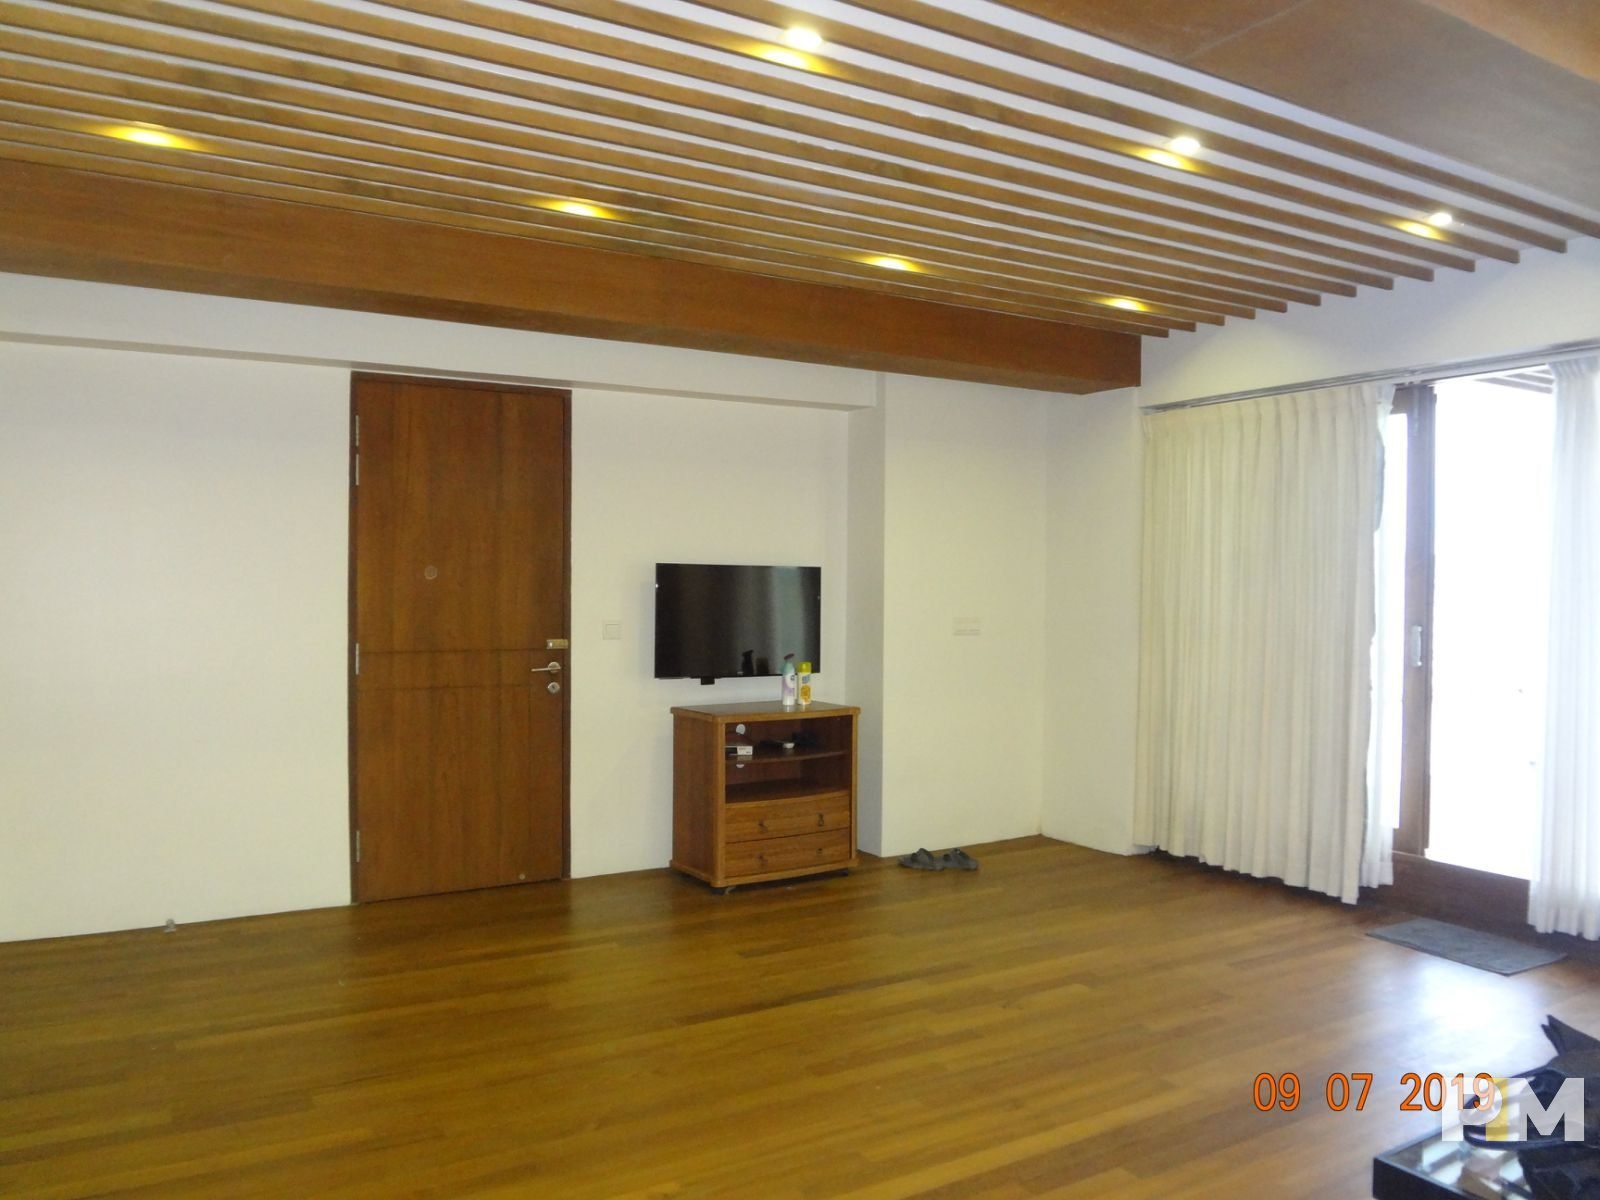 living room with TV - Myanmar Property